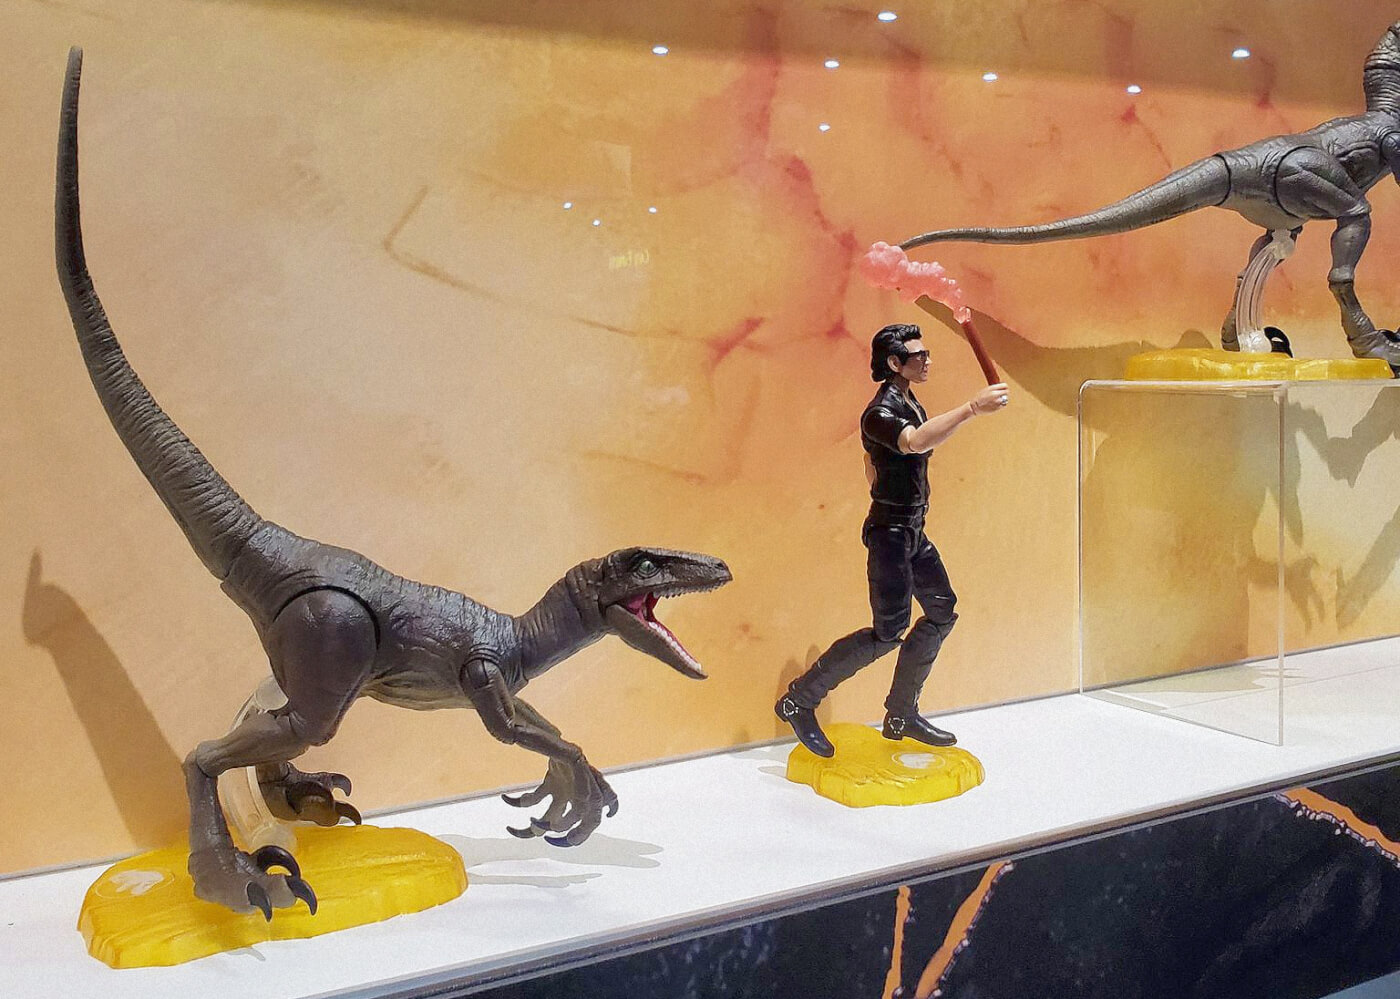 Jurassic World Amber Collection By Mattel Revealed At Sdcc Gamestop Exclusive Available For Pre Order Now Jurassic Outpost